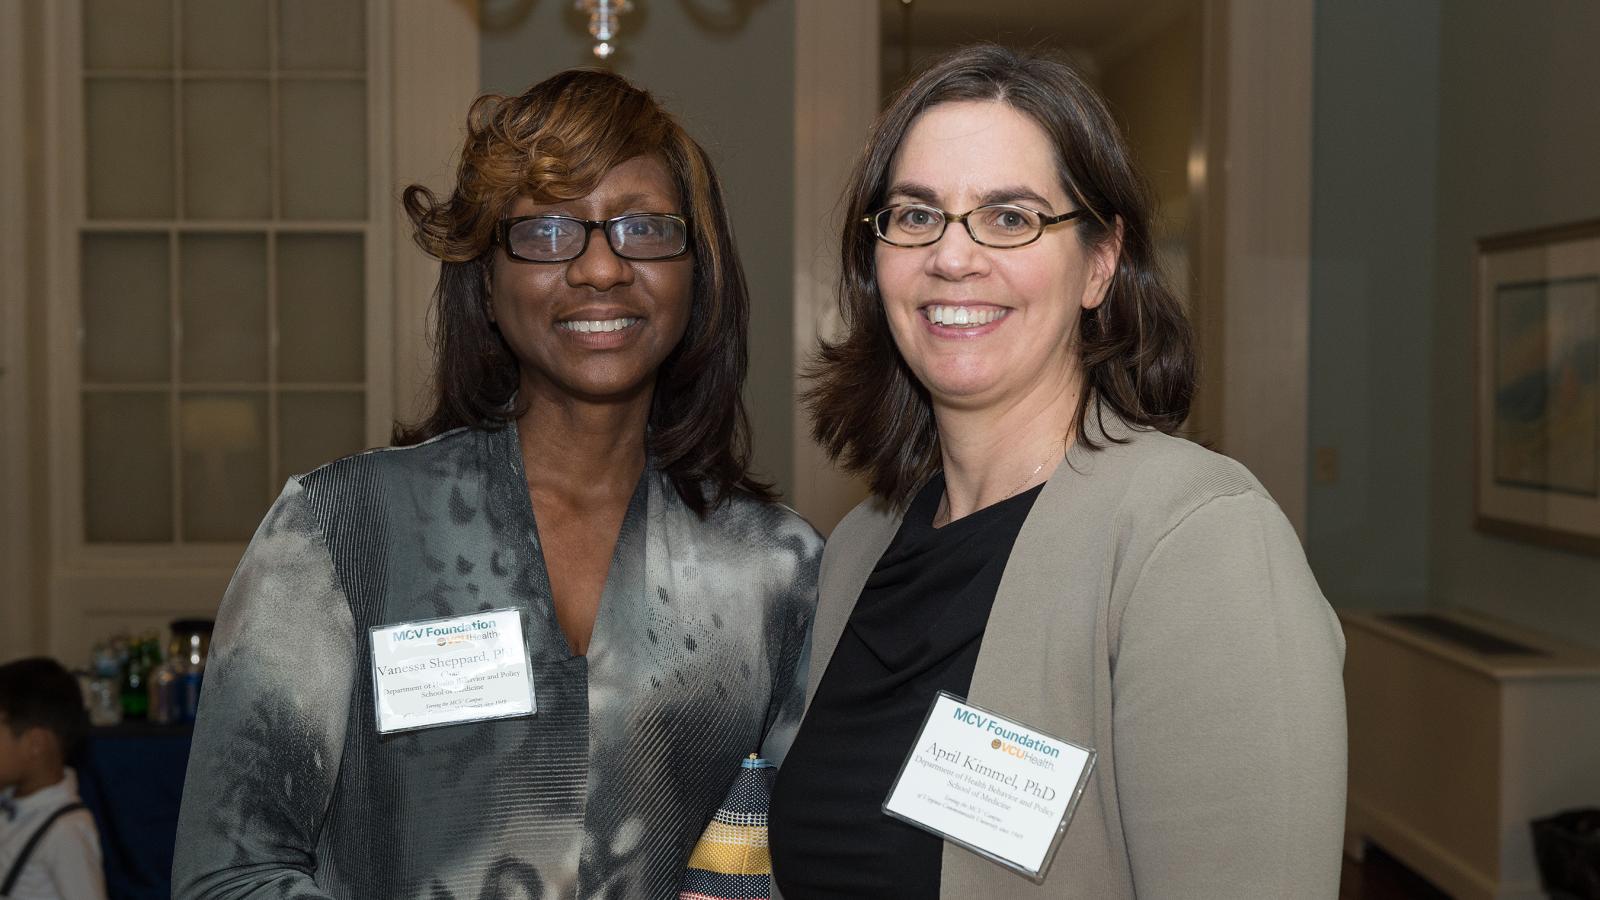 Dr. Vanessa Sheppard, Ph.D., and Dr. April Kimmel, Ph.D., of the VCU School of Medicine's Department of Health Behavior and Policy